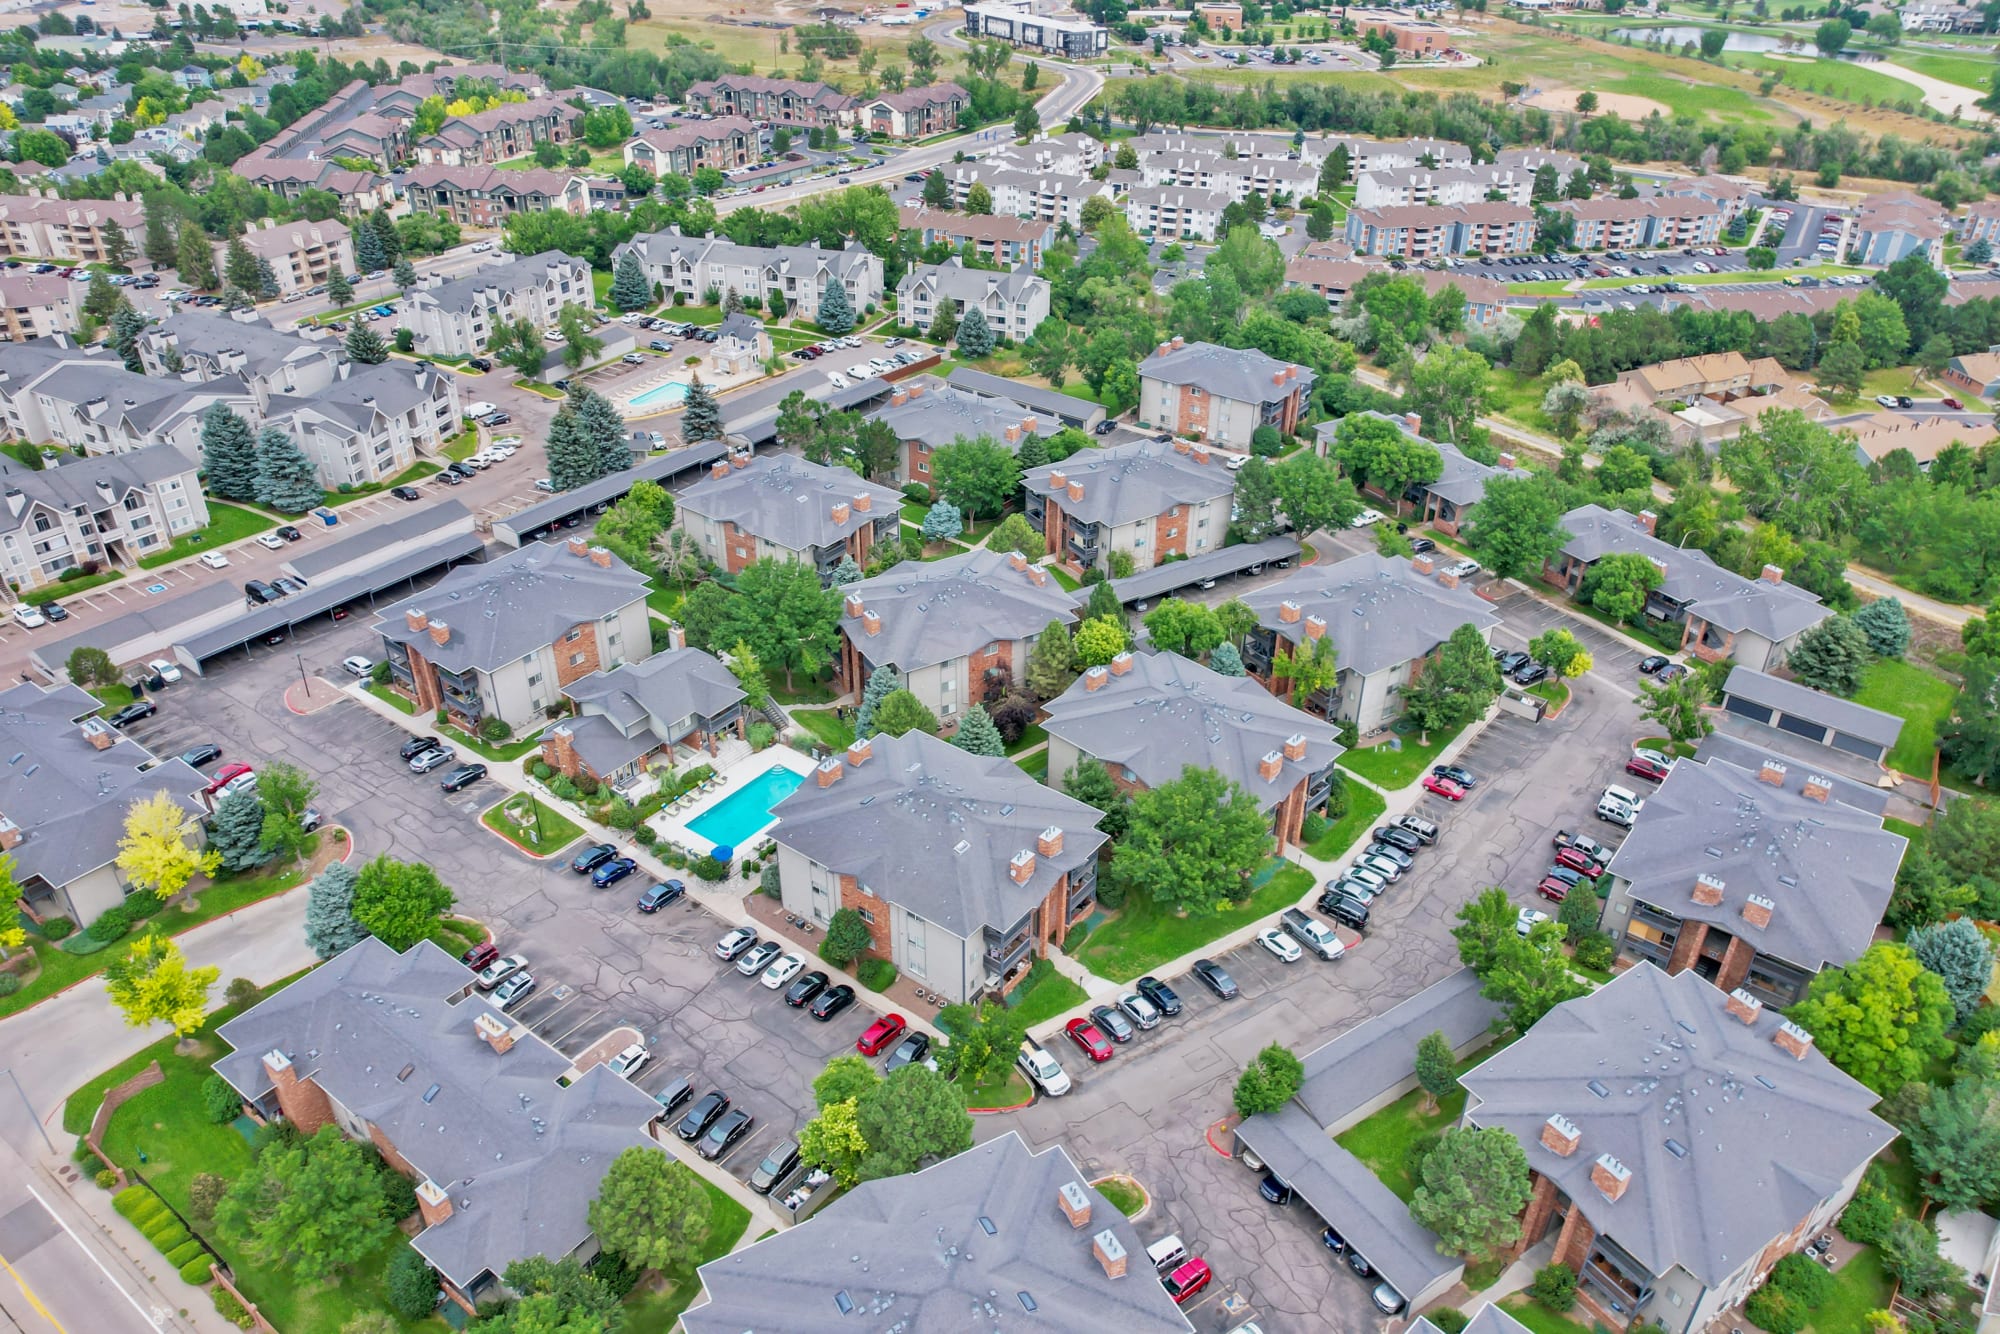 An aerial view of the property and surrounding areas at Arapahoe Club Apartments in Denver, Colorado